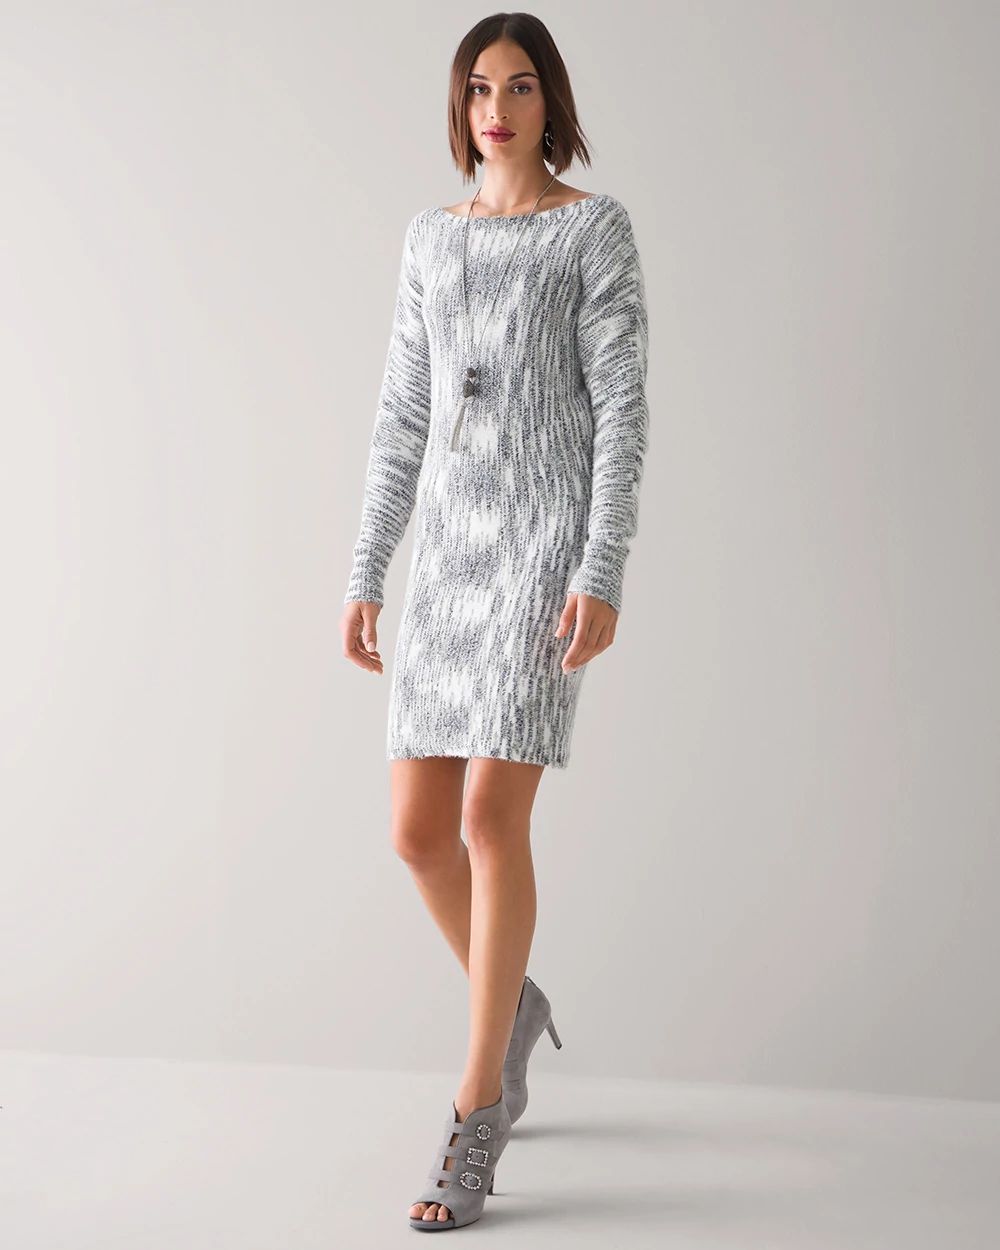 Cozy Spacedye Sweater Dress click to view larger image.